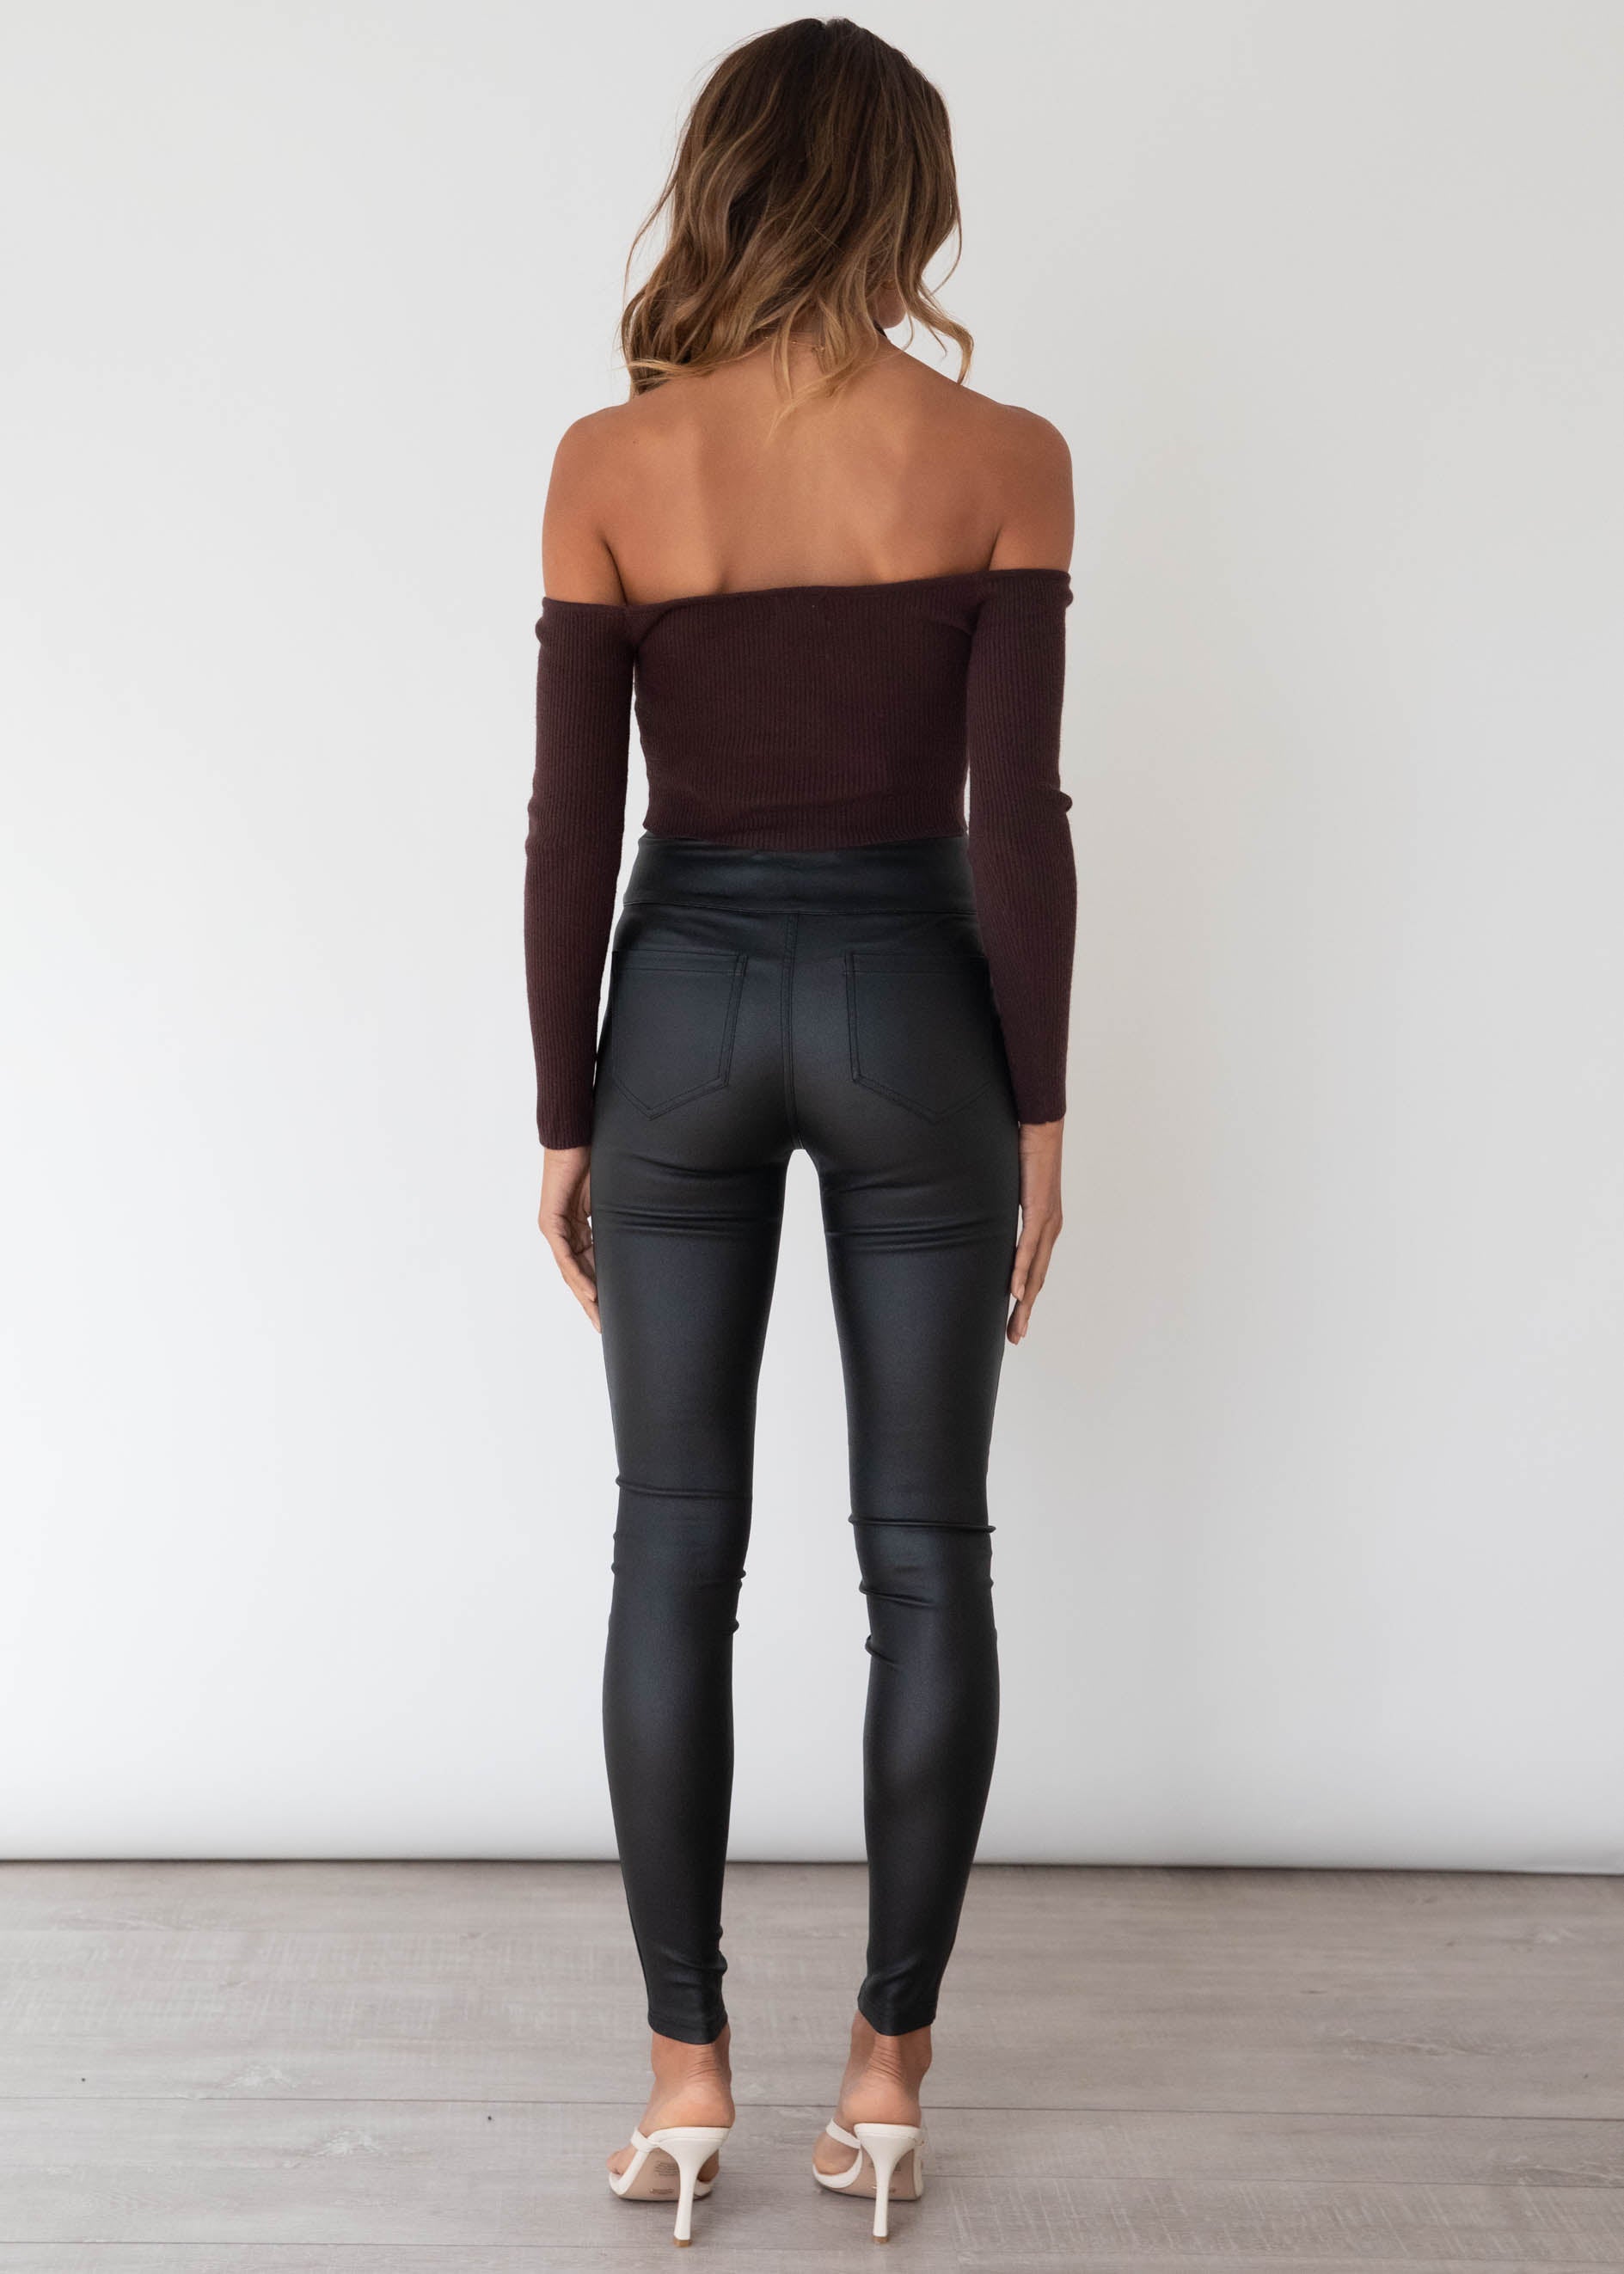 Open Hearts Knit Top - Chocolate